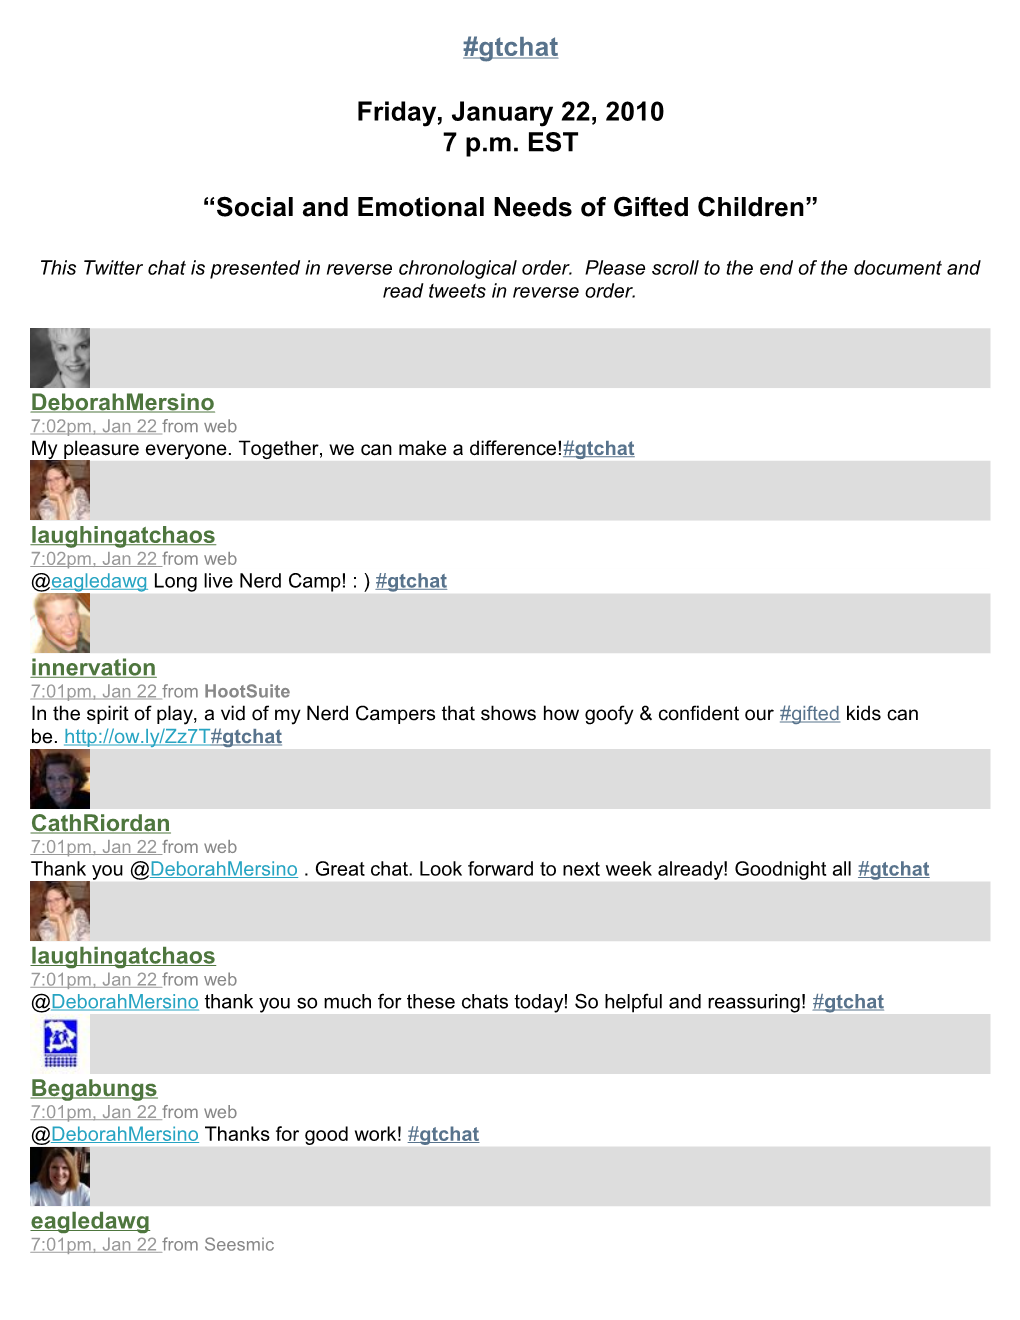 Social and Emotional Needs of Gifted Children